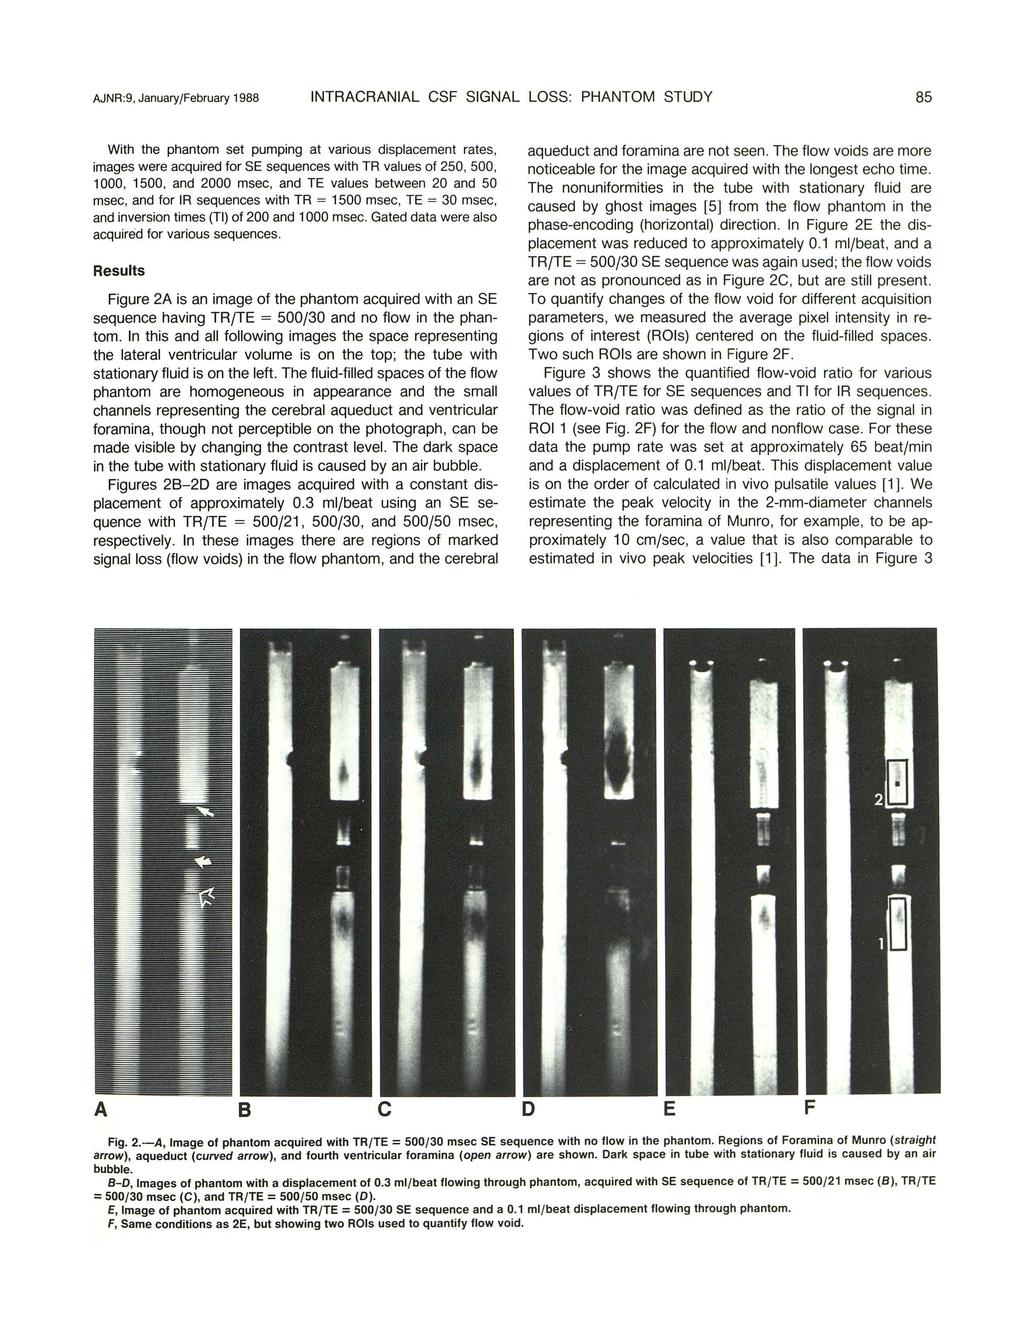 AJNR :9, January/February 1988 NTRACRANAL CSF SGNAL LOSS: PHANTOM STUDY 85 With the phantom set pumping at various displacement rates, images were acquired for SE sequences with TR values of 25, 5,